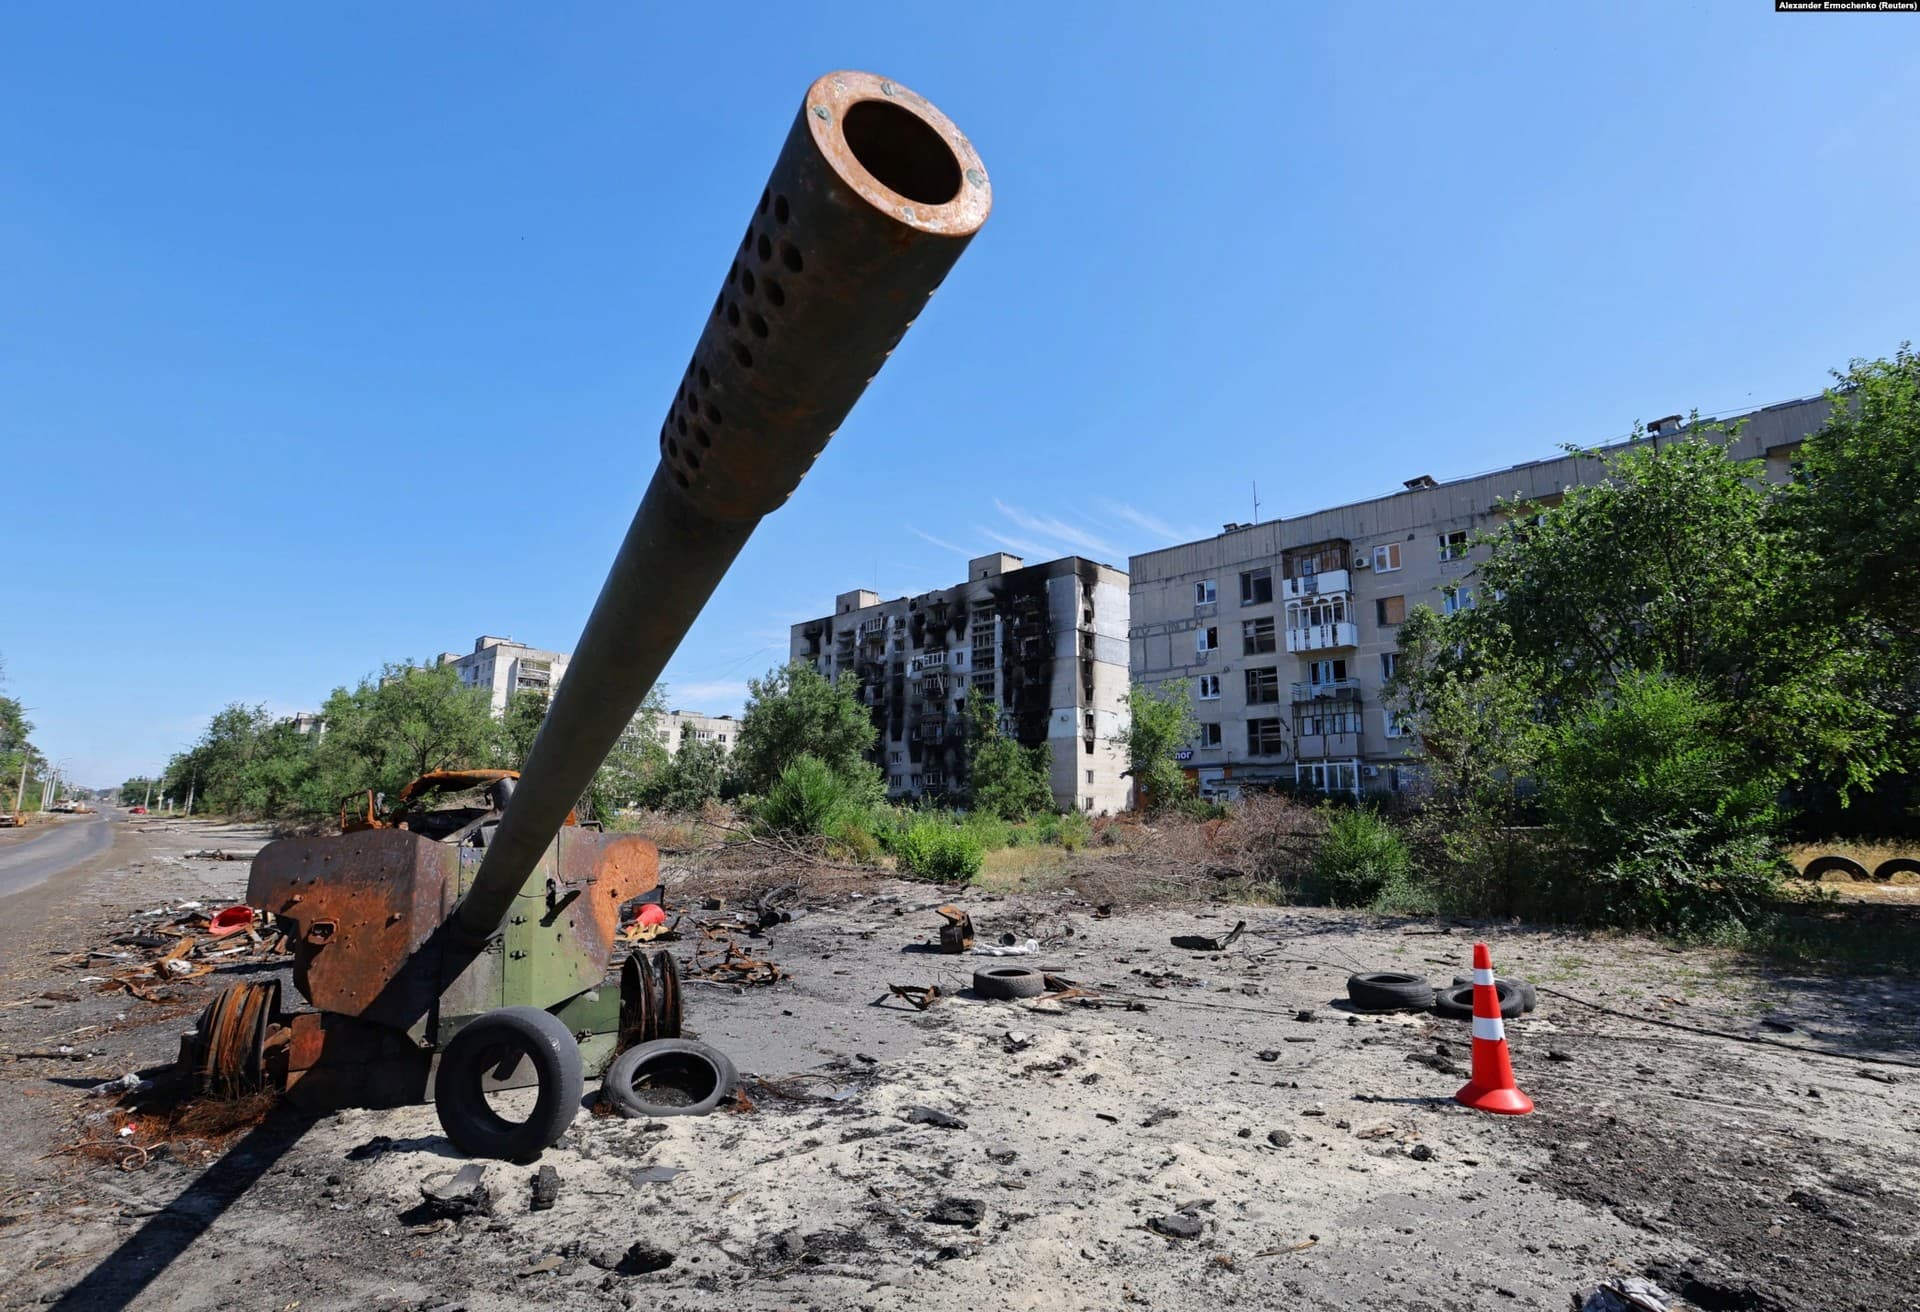 The remains of an MT-12 Rapira anti-tank gun near burned-out residential buildings